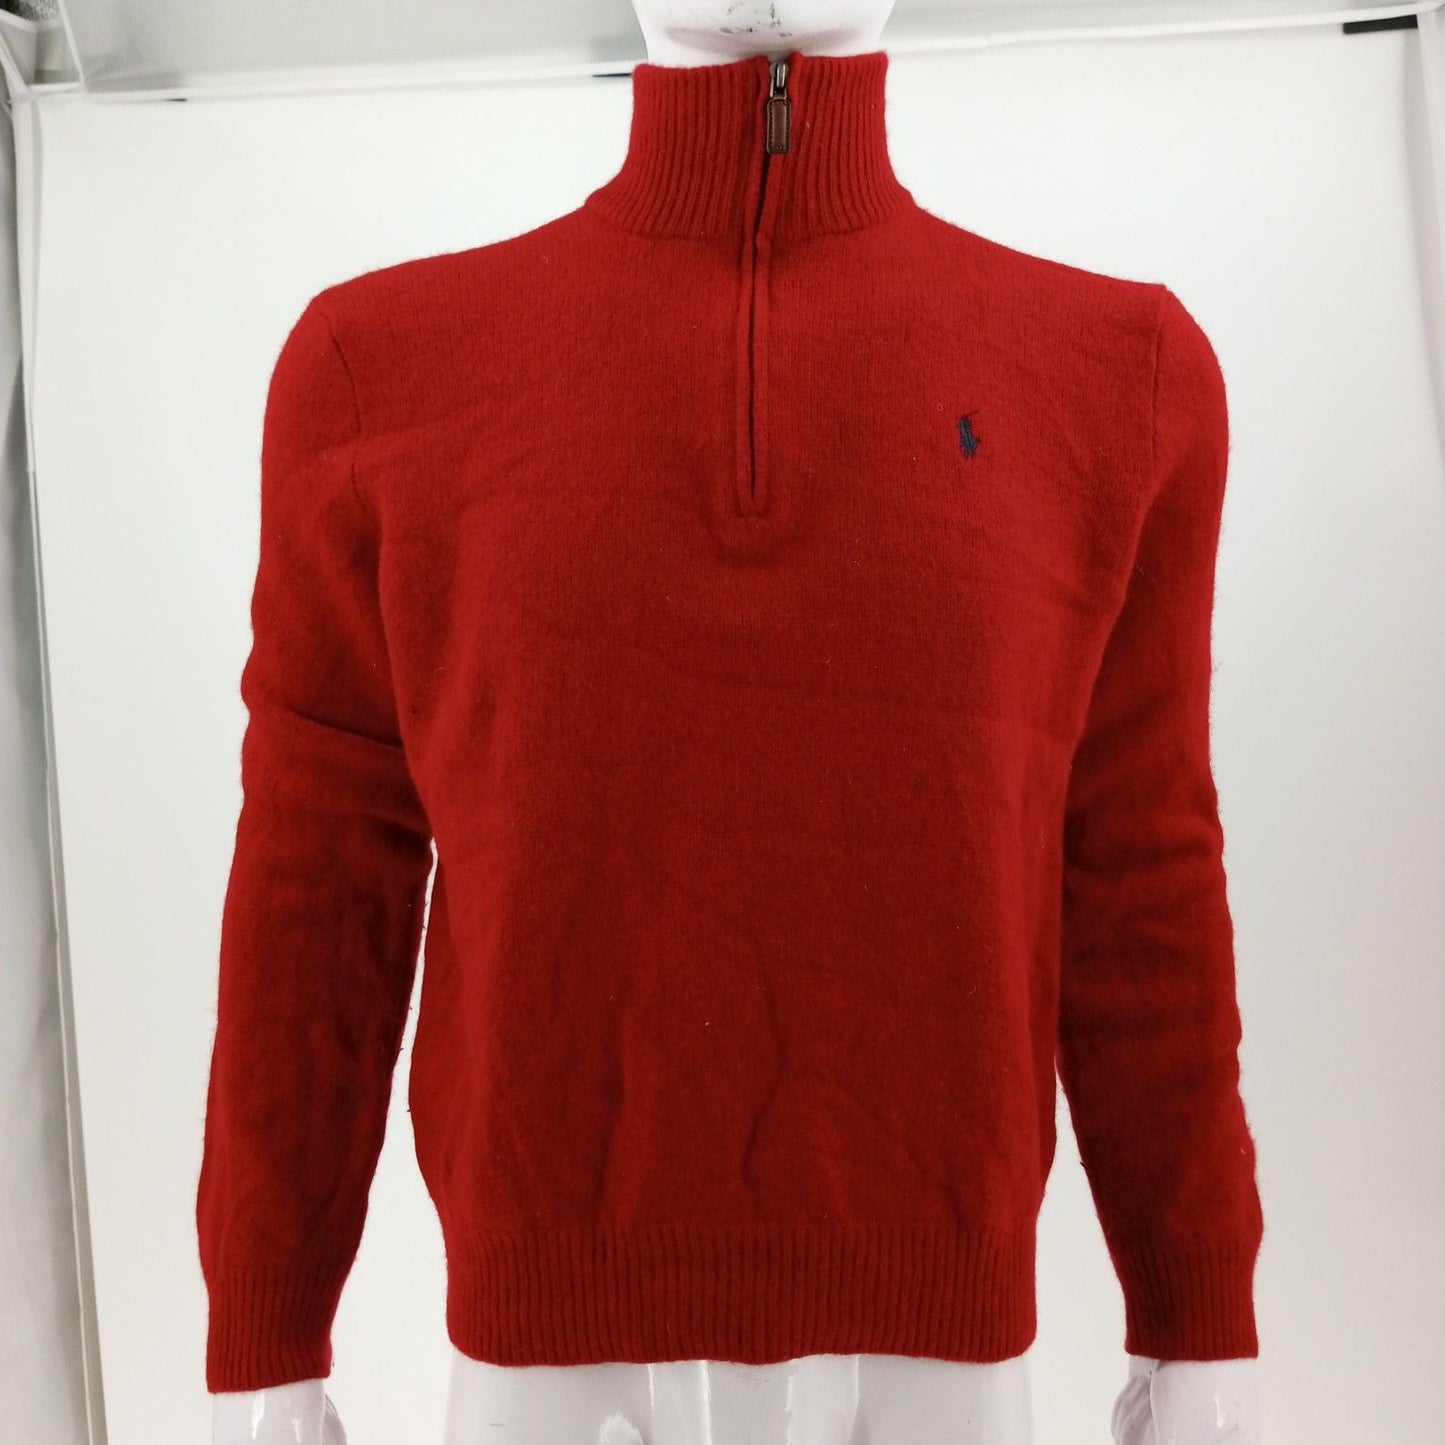 Polo Ralph Lauren, Tommy Hilfiger, and Others Jackets/Sweaters/Vest Box 18 Count